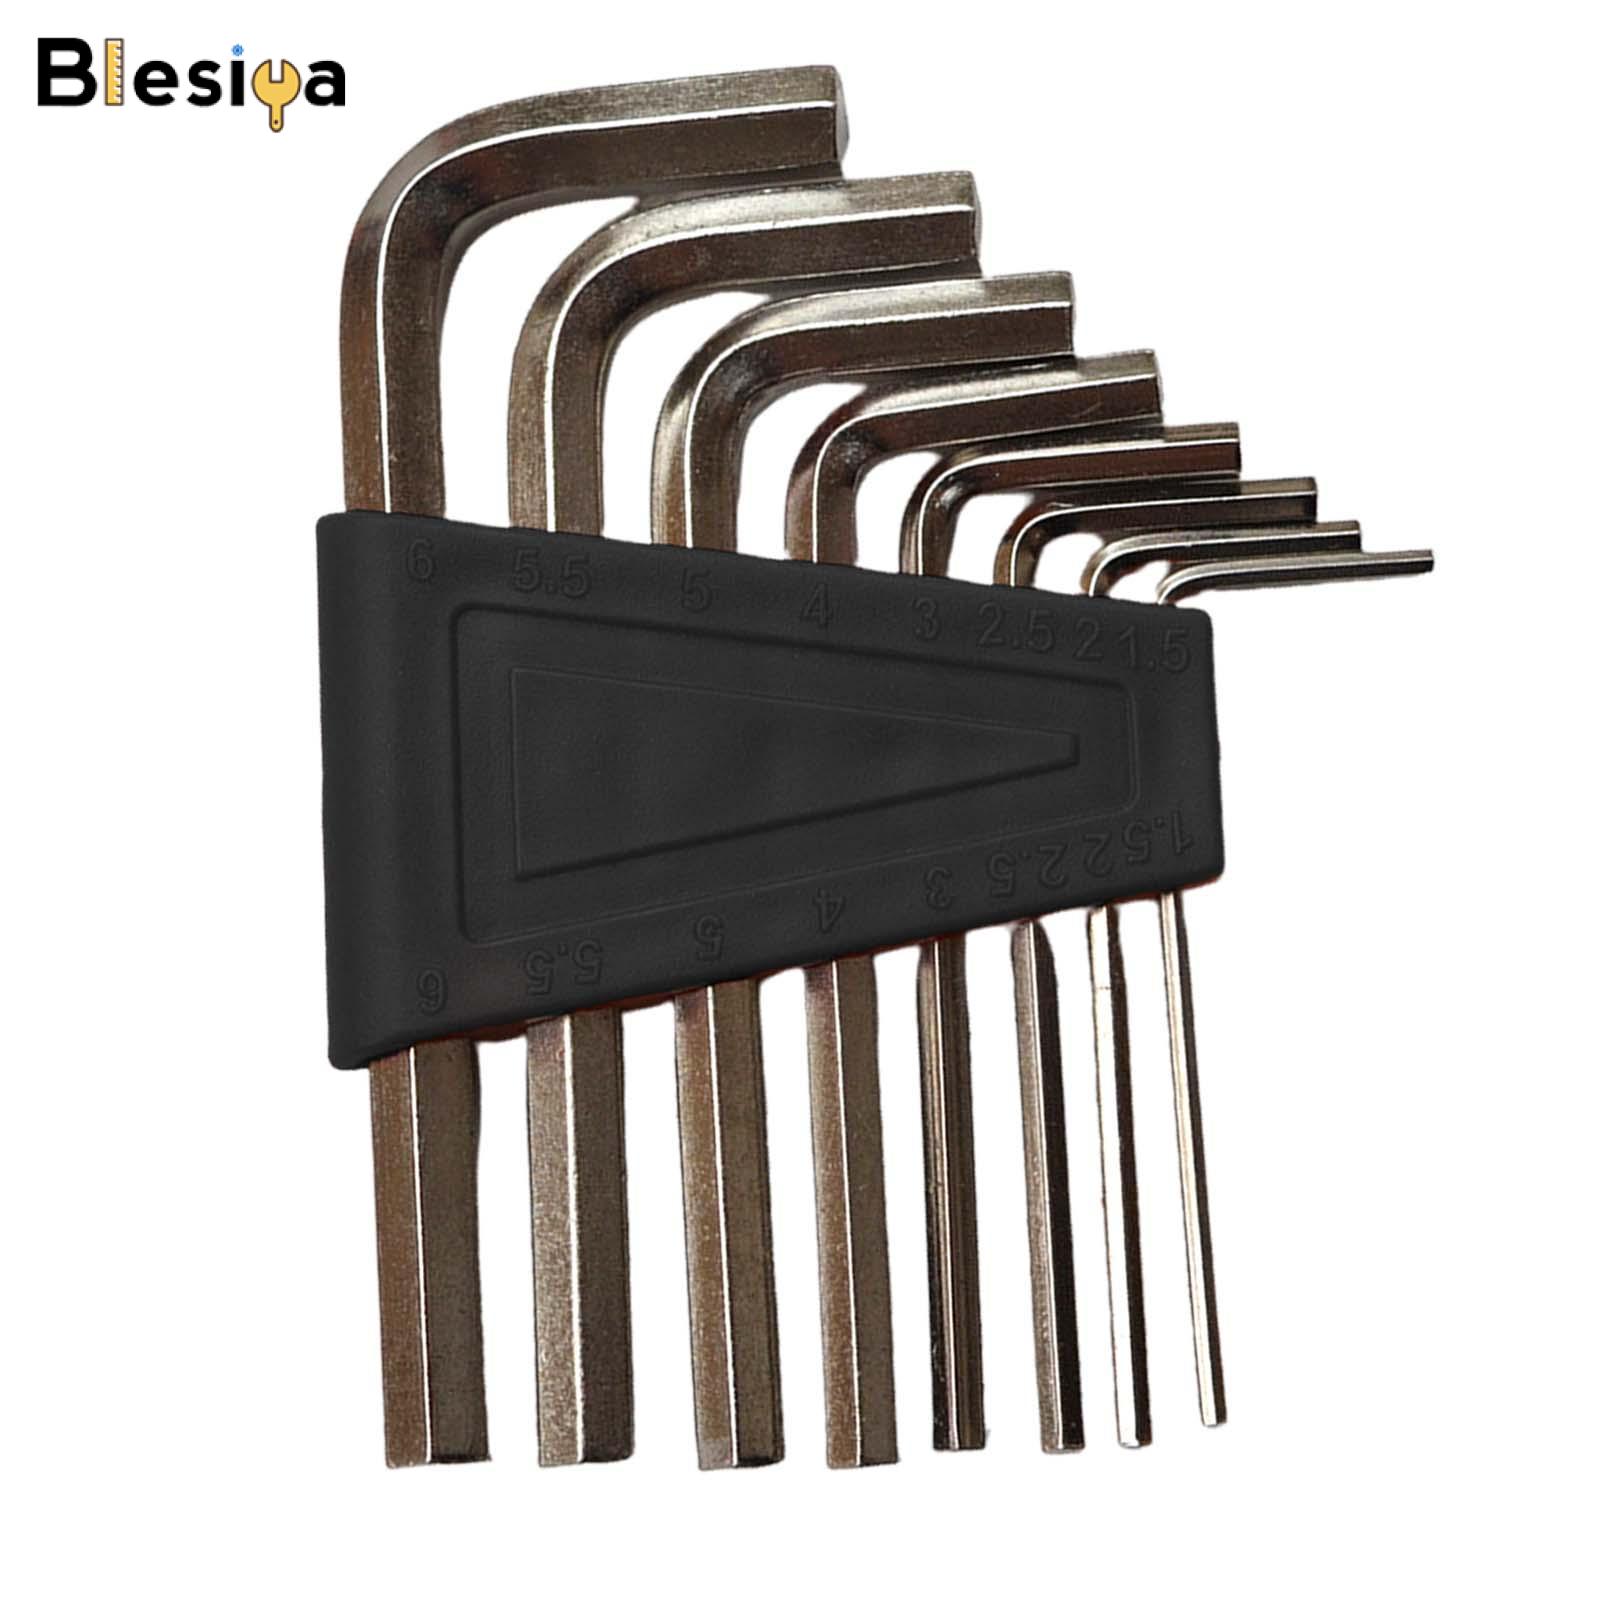 Blesiya 8 Pieces Hex Key Set Replaces Allen Key Sets for Furniture